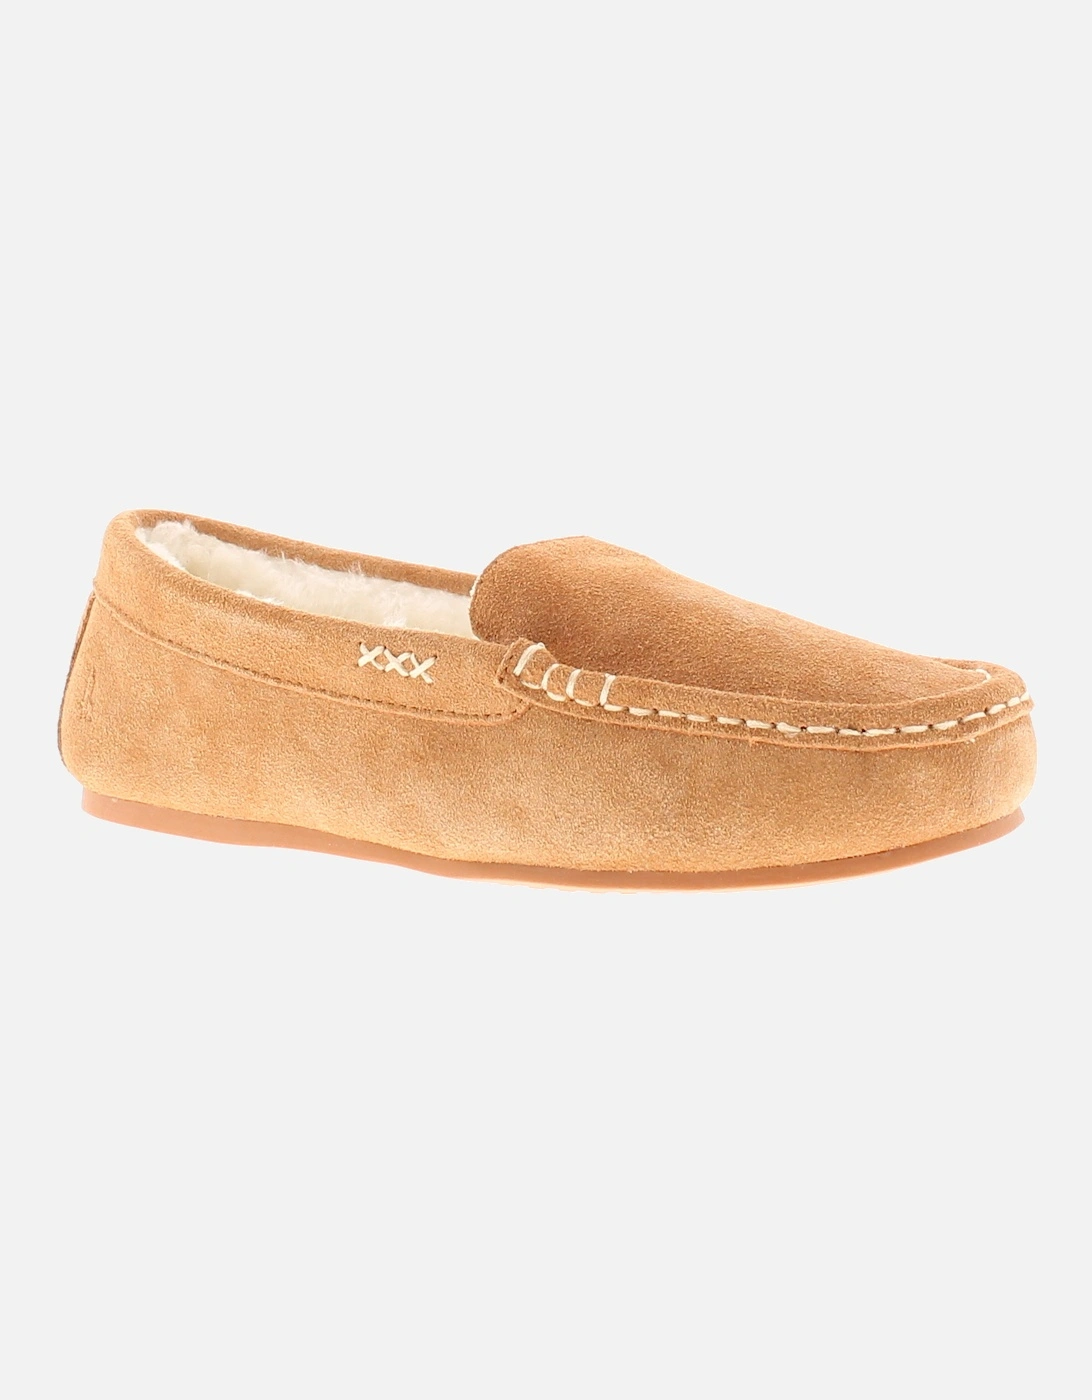 Womens Moccasin Slippers Annie Suede Leather tan UK Size, 6 of 5